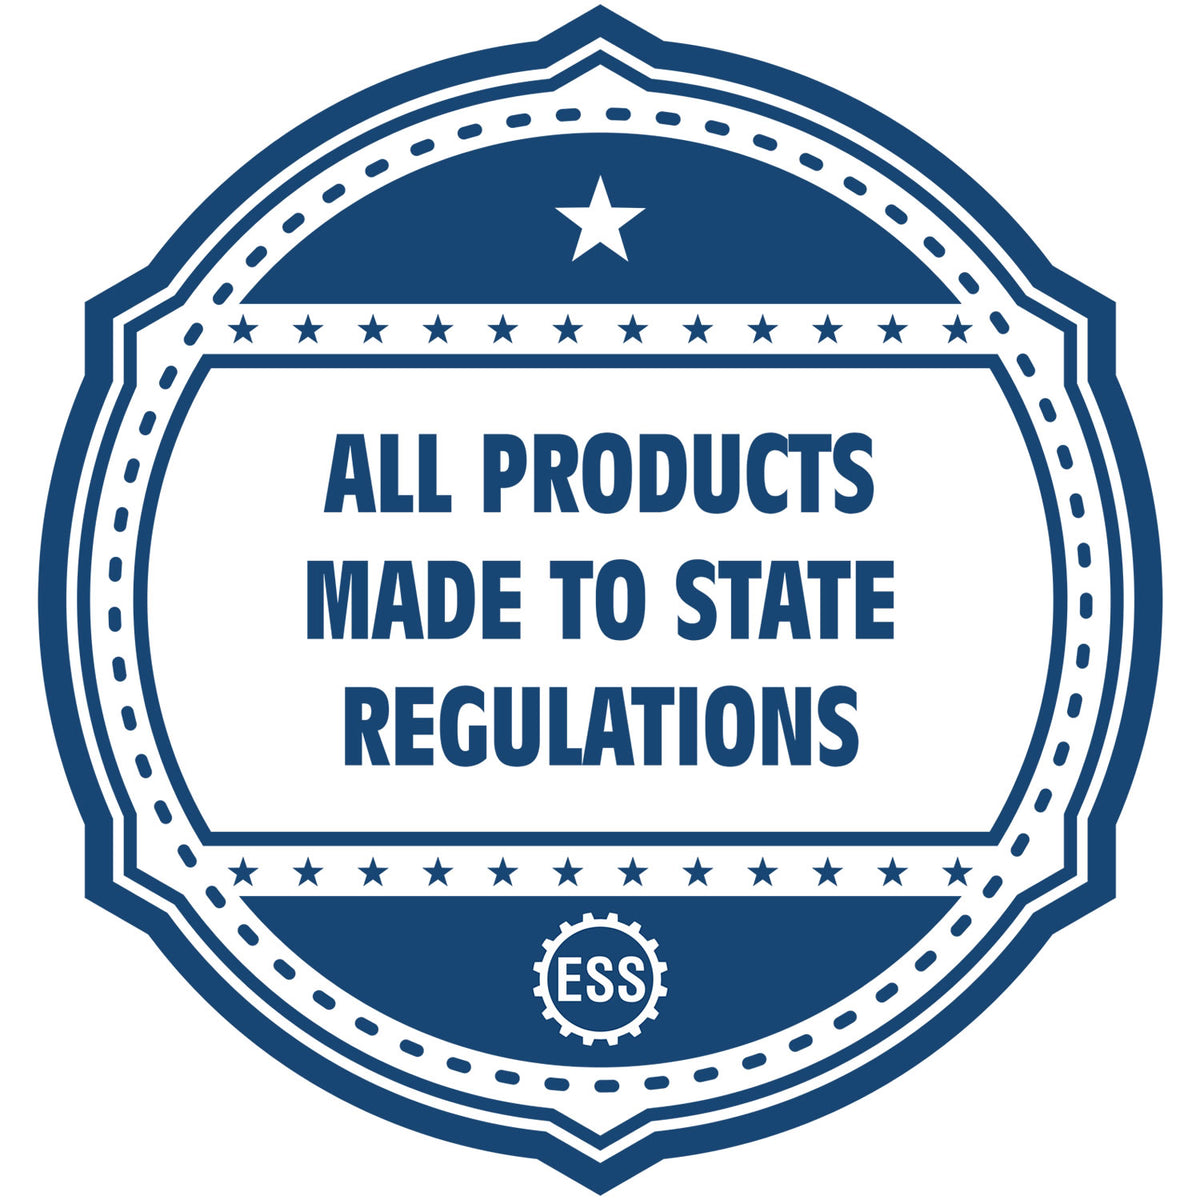 An icon or badge element for the Colorado Desk Surveyor Seal Embosser showing that this product is made in compliance with state regulations.